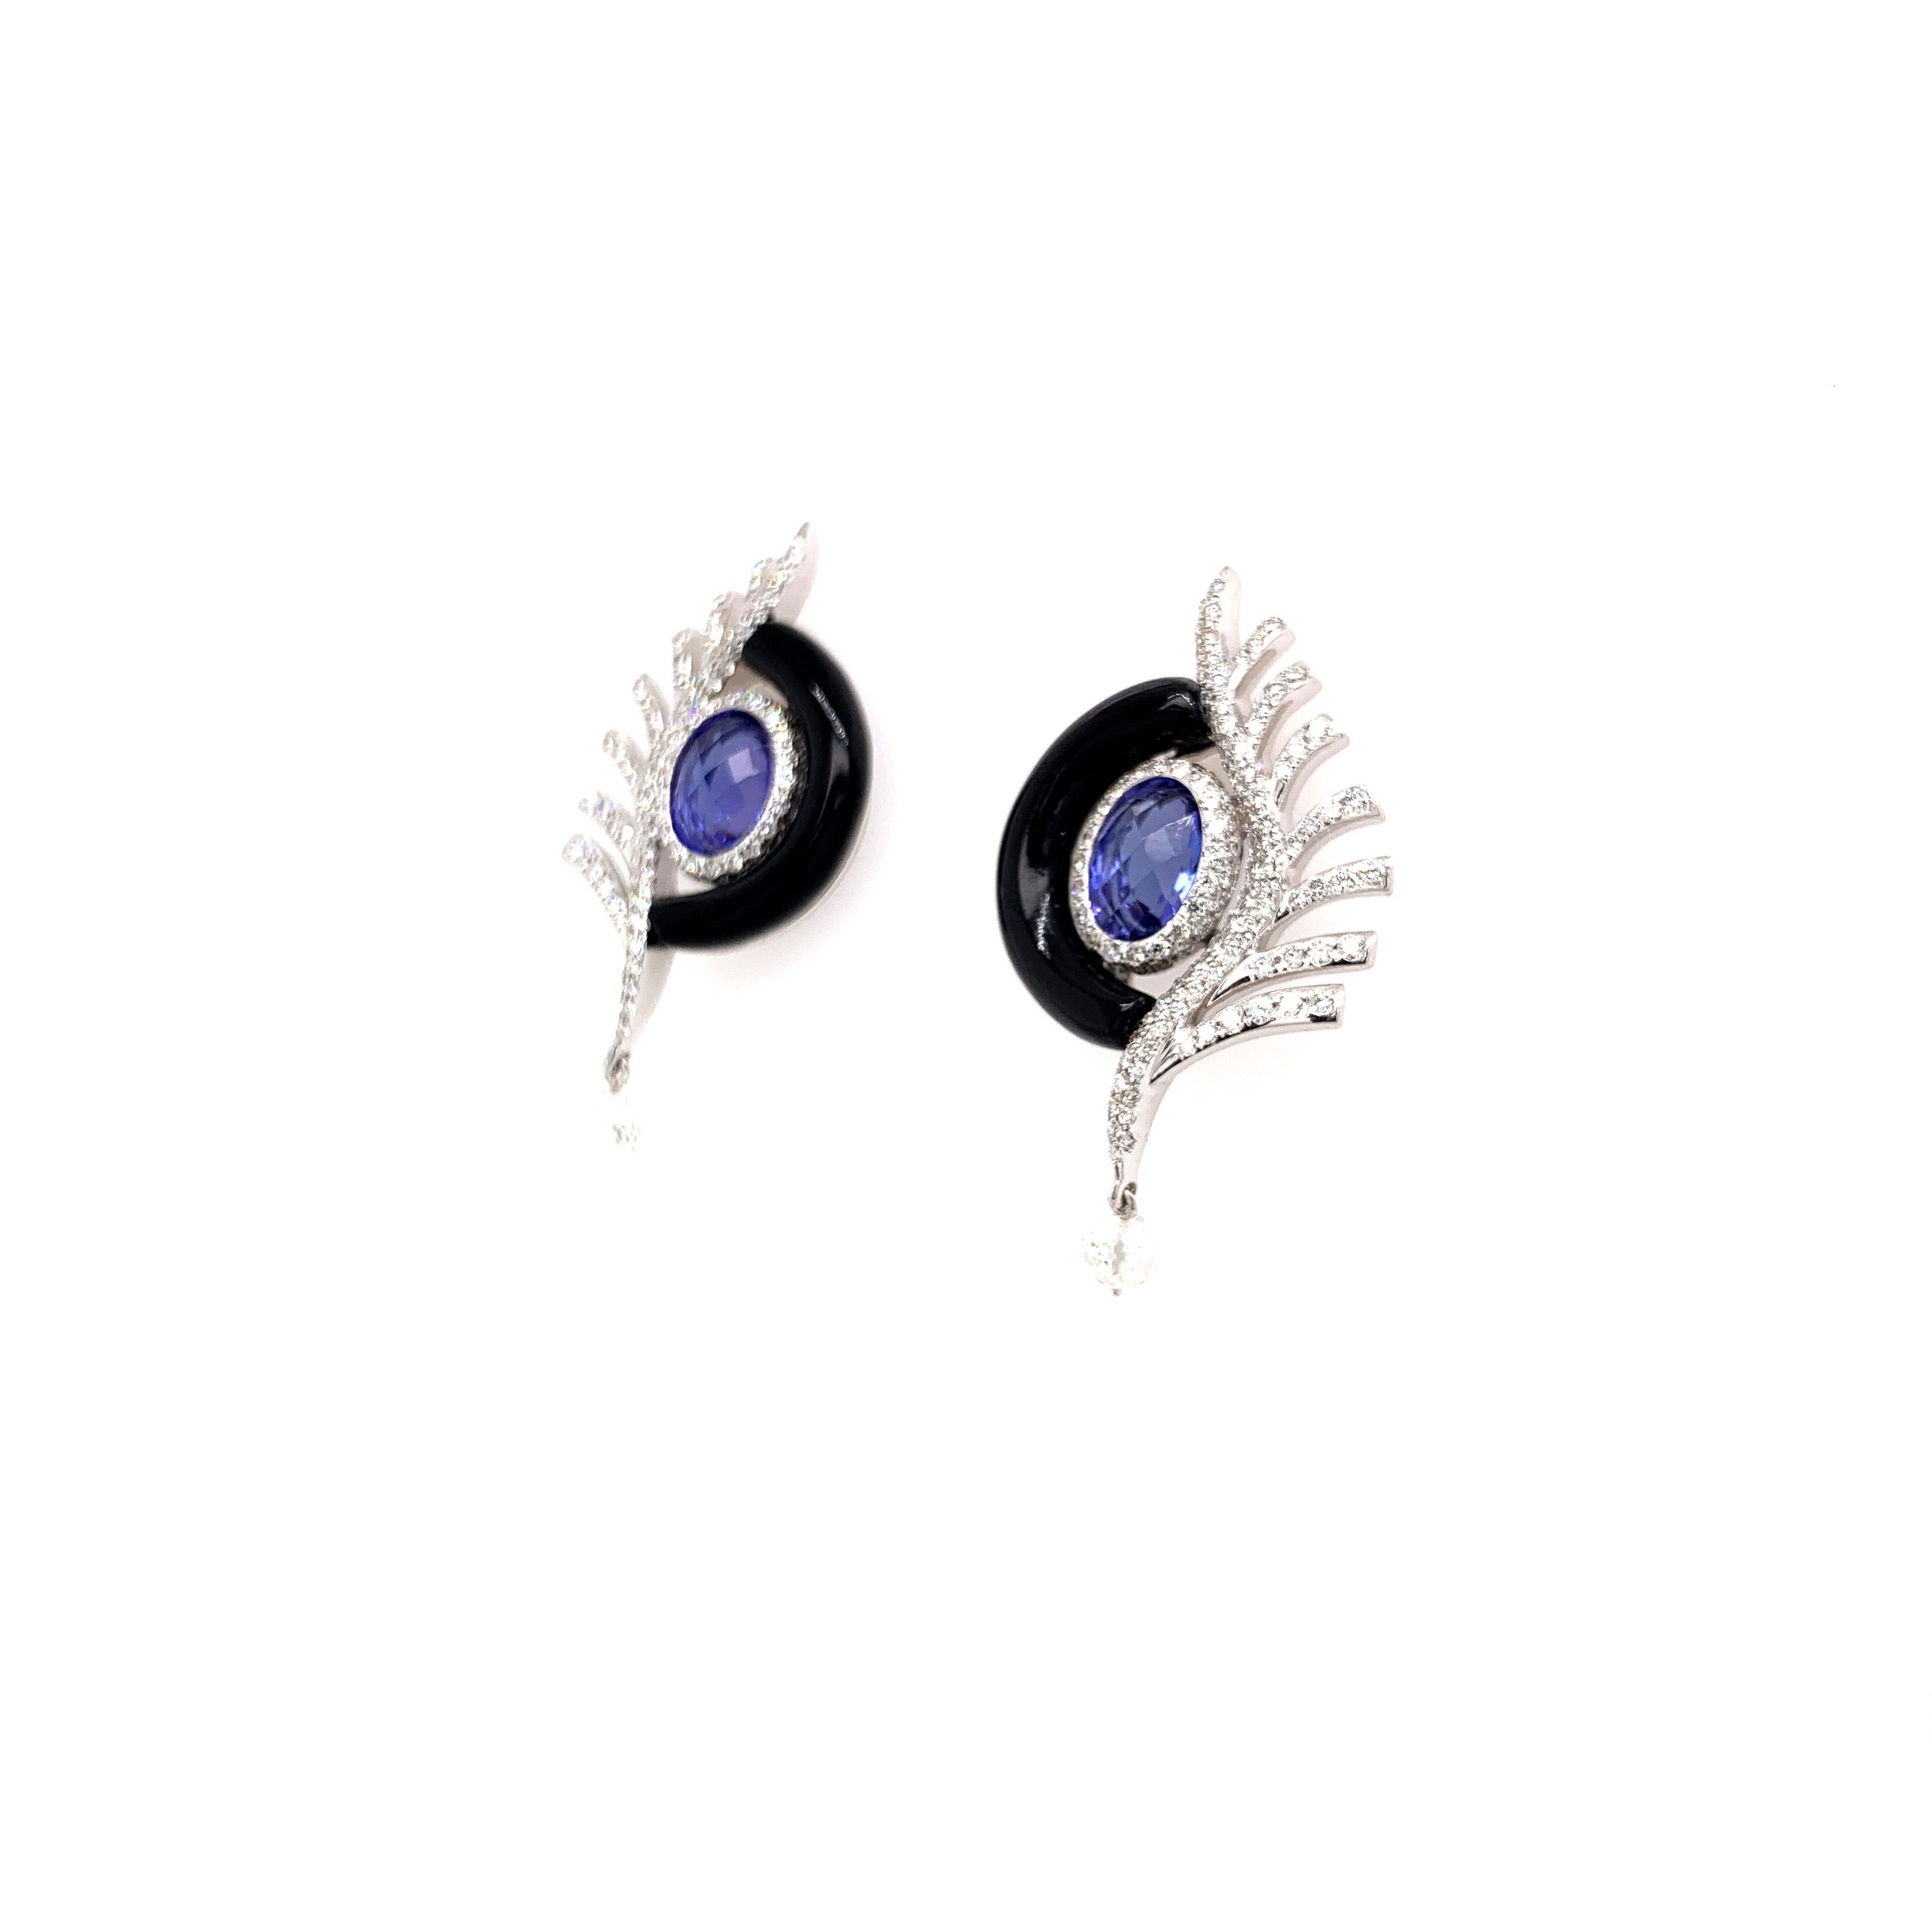 Stunning feather-inspired diamond earrings using hand-cut onyx and gorgeous tanzanite ovals in 18 karat white gold.

Round, brilliant-cut diamonds are pavé set along the feather and around the tanzanite oval. Diamond briolettes dangle at the bottom